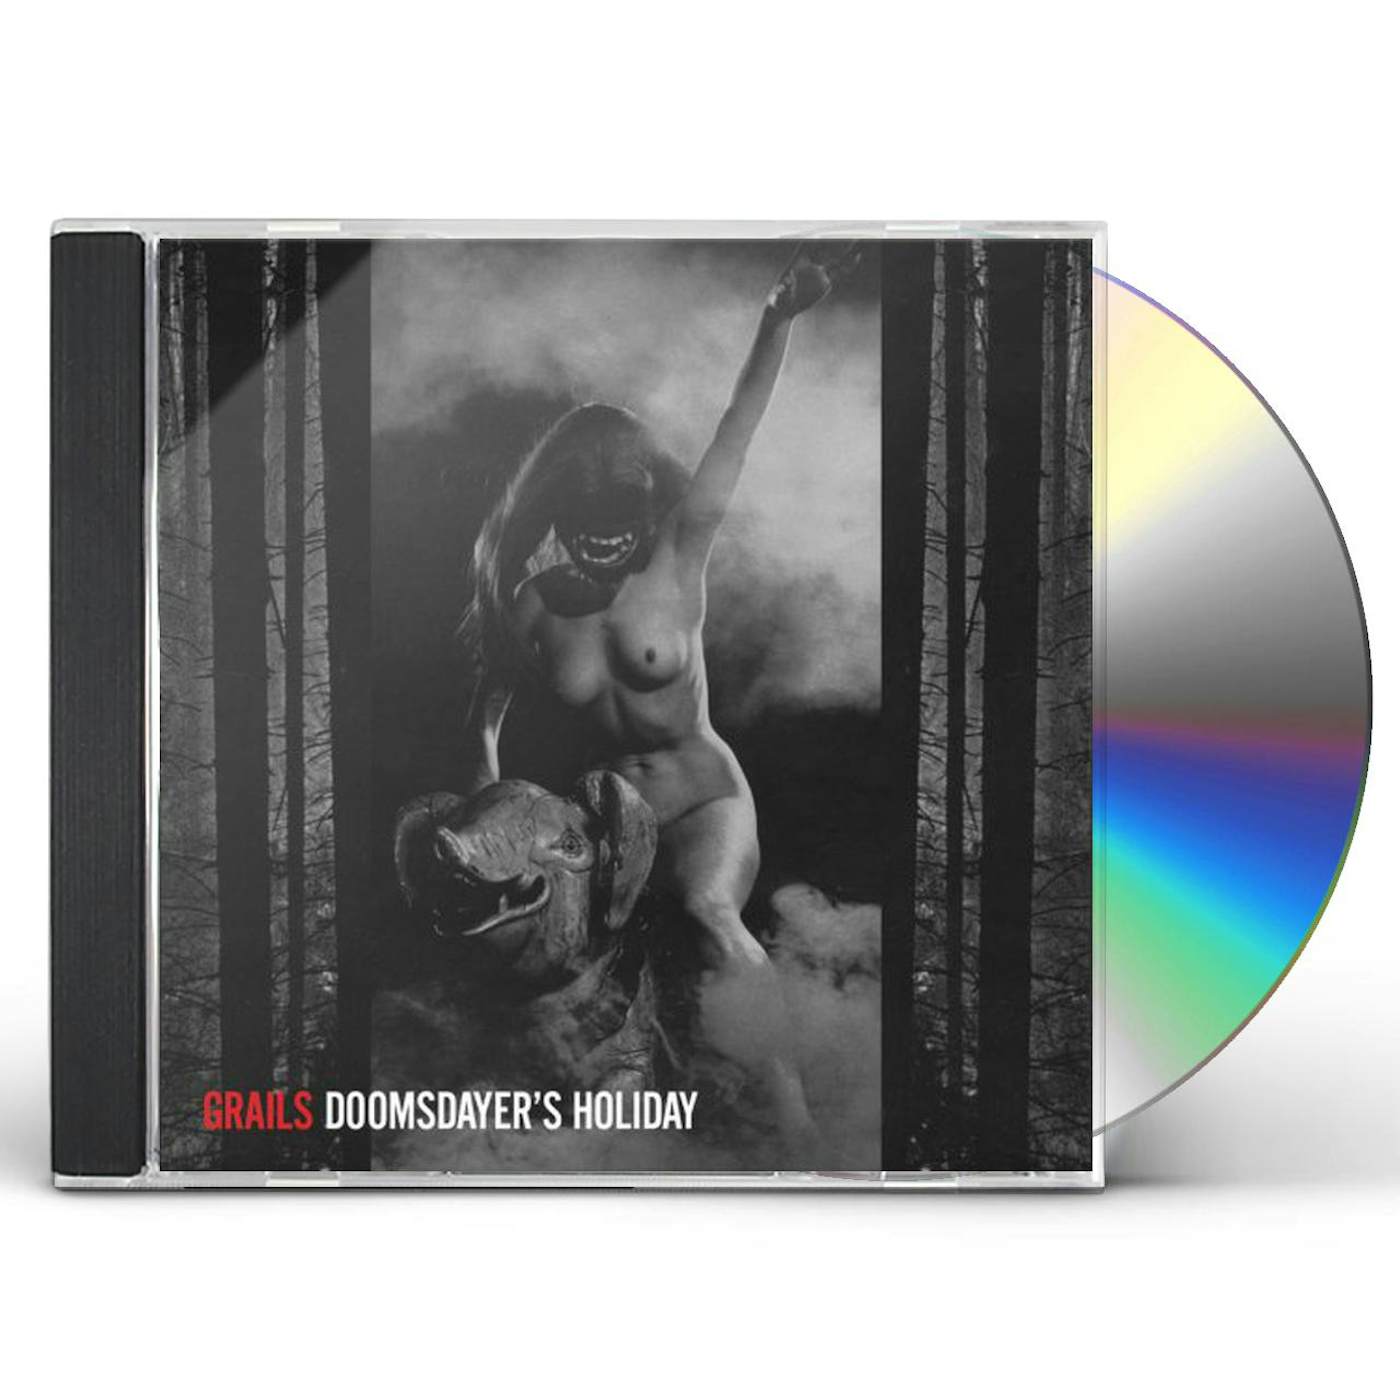 Grails DOOMSDAYERS HOLIDAY CD